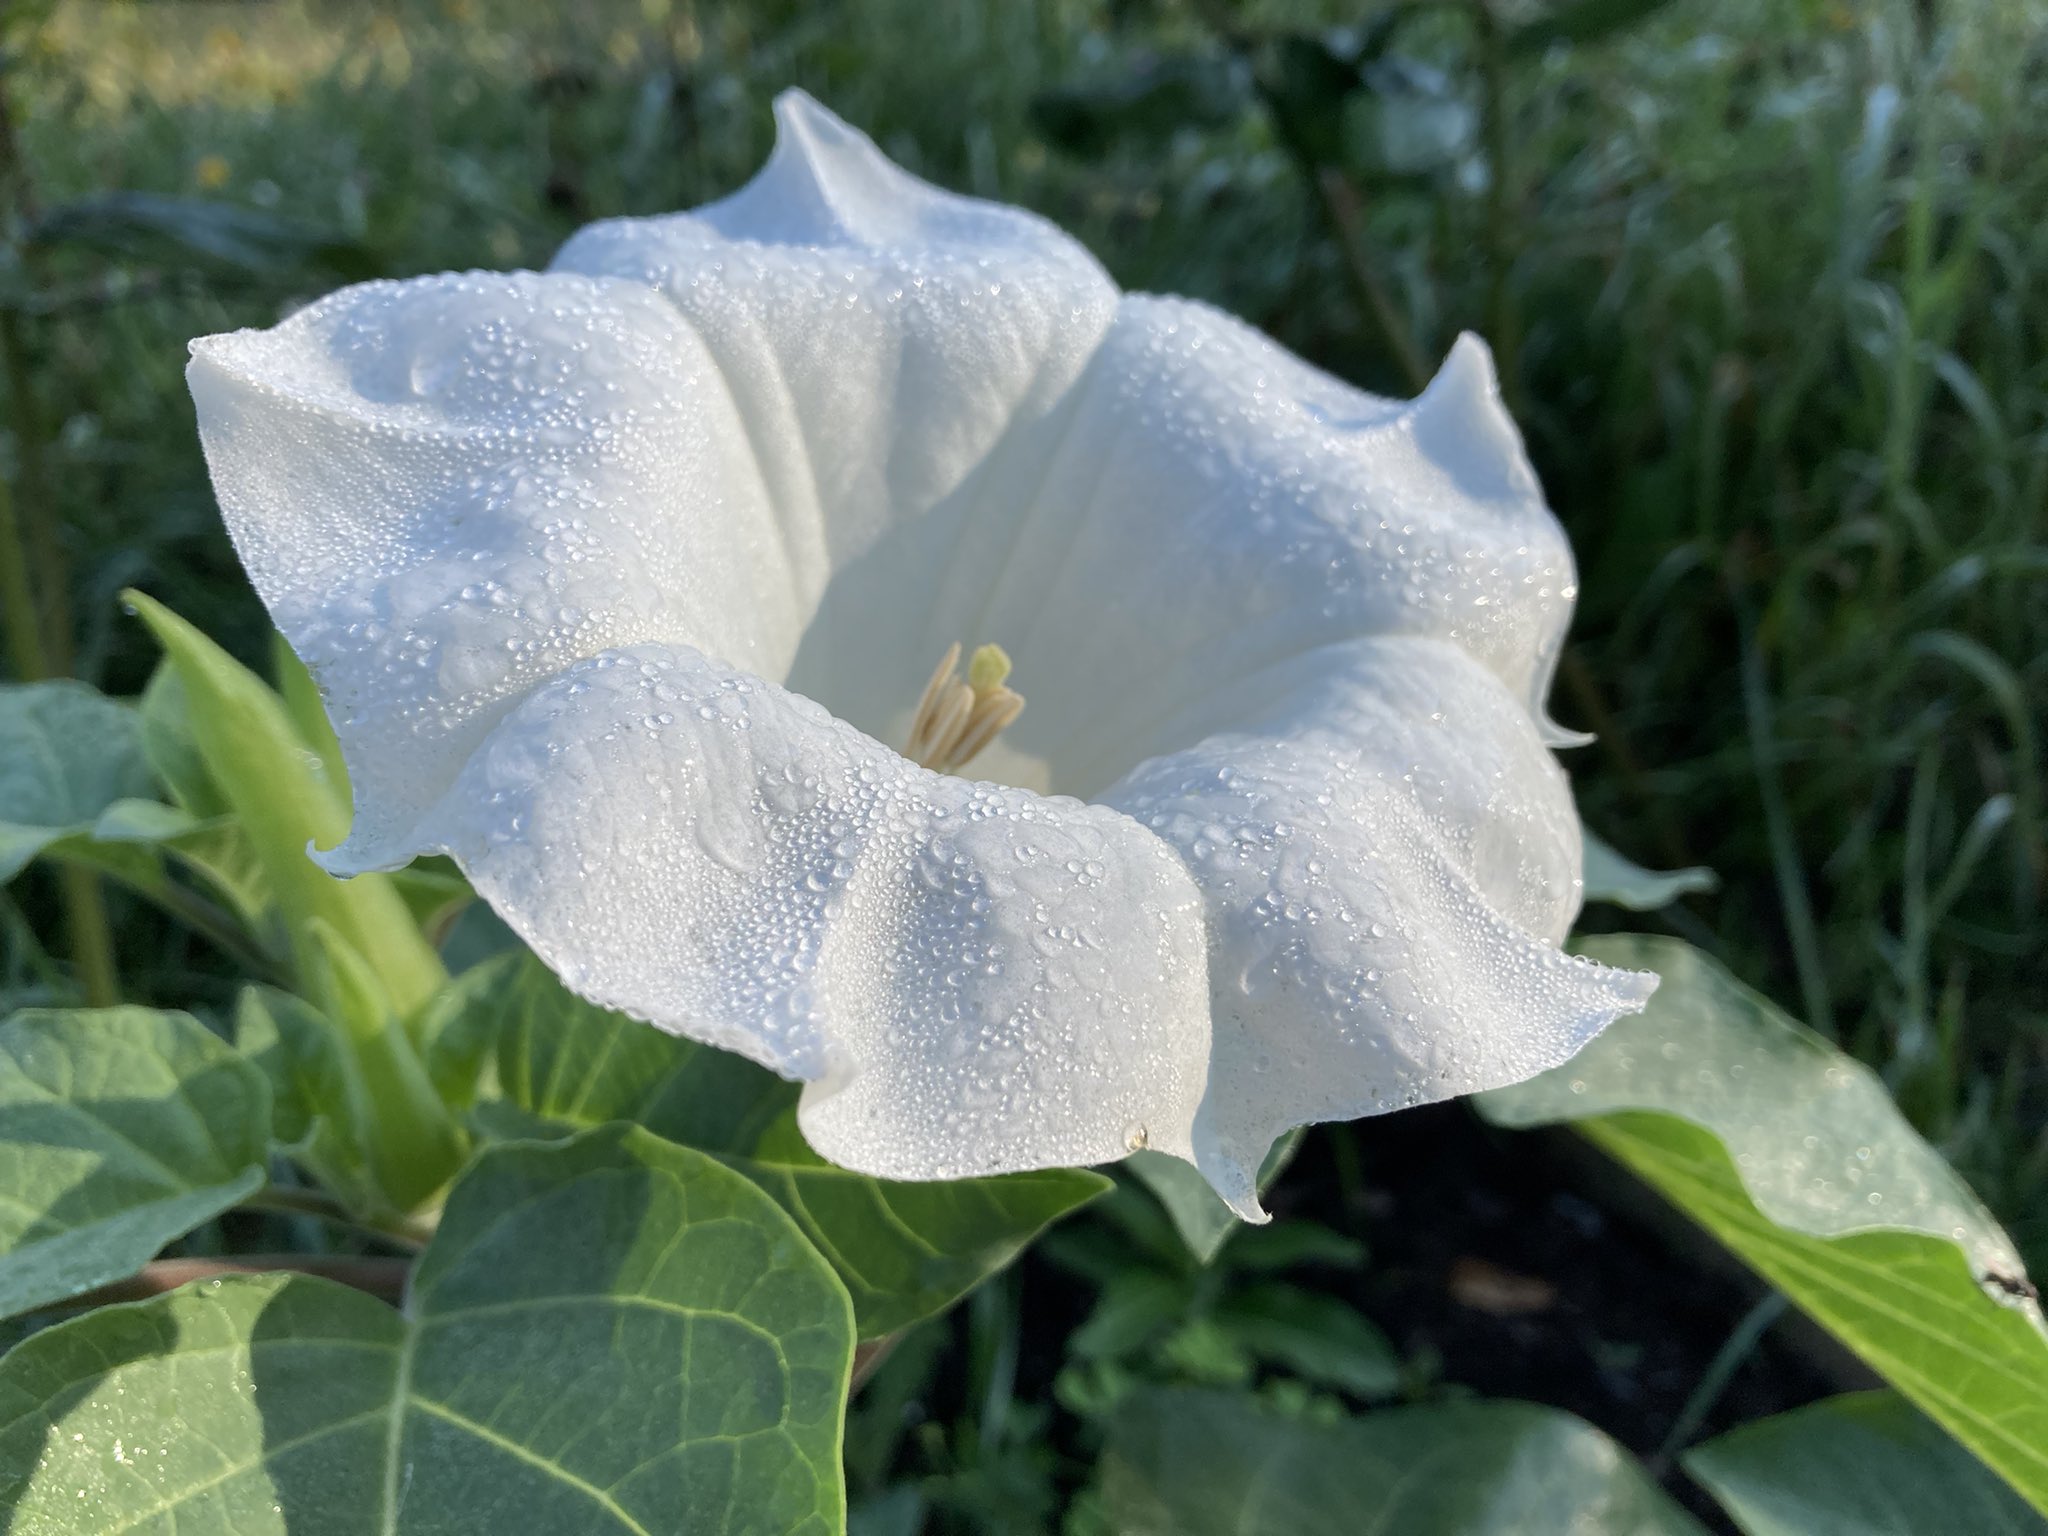 Bane Folk Did You Know Datura Is A Popular Note In Modern Perfumery Because Its Toxic Alkaloids Survive Both Enfleurage And The Distillation Process All Perfumes With Datura Notes Are